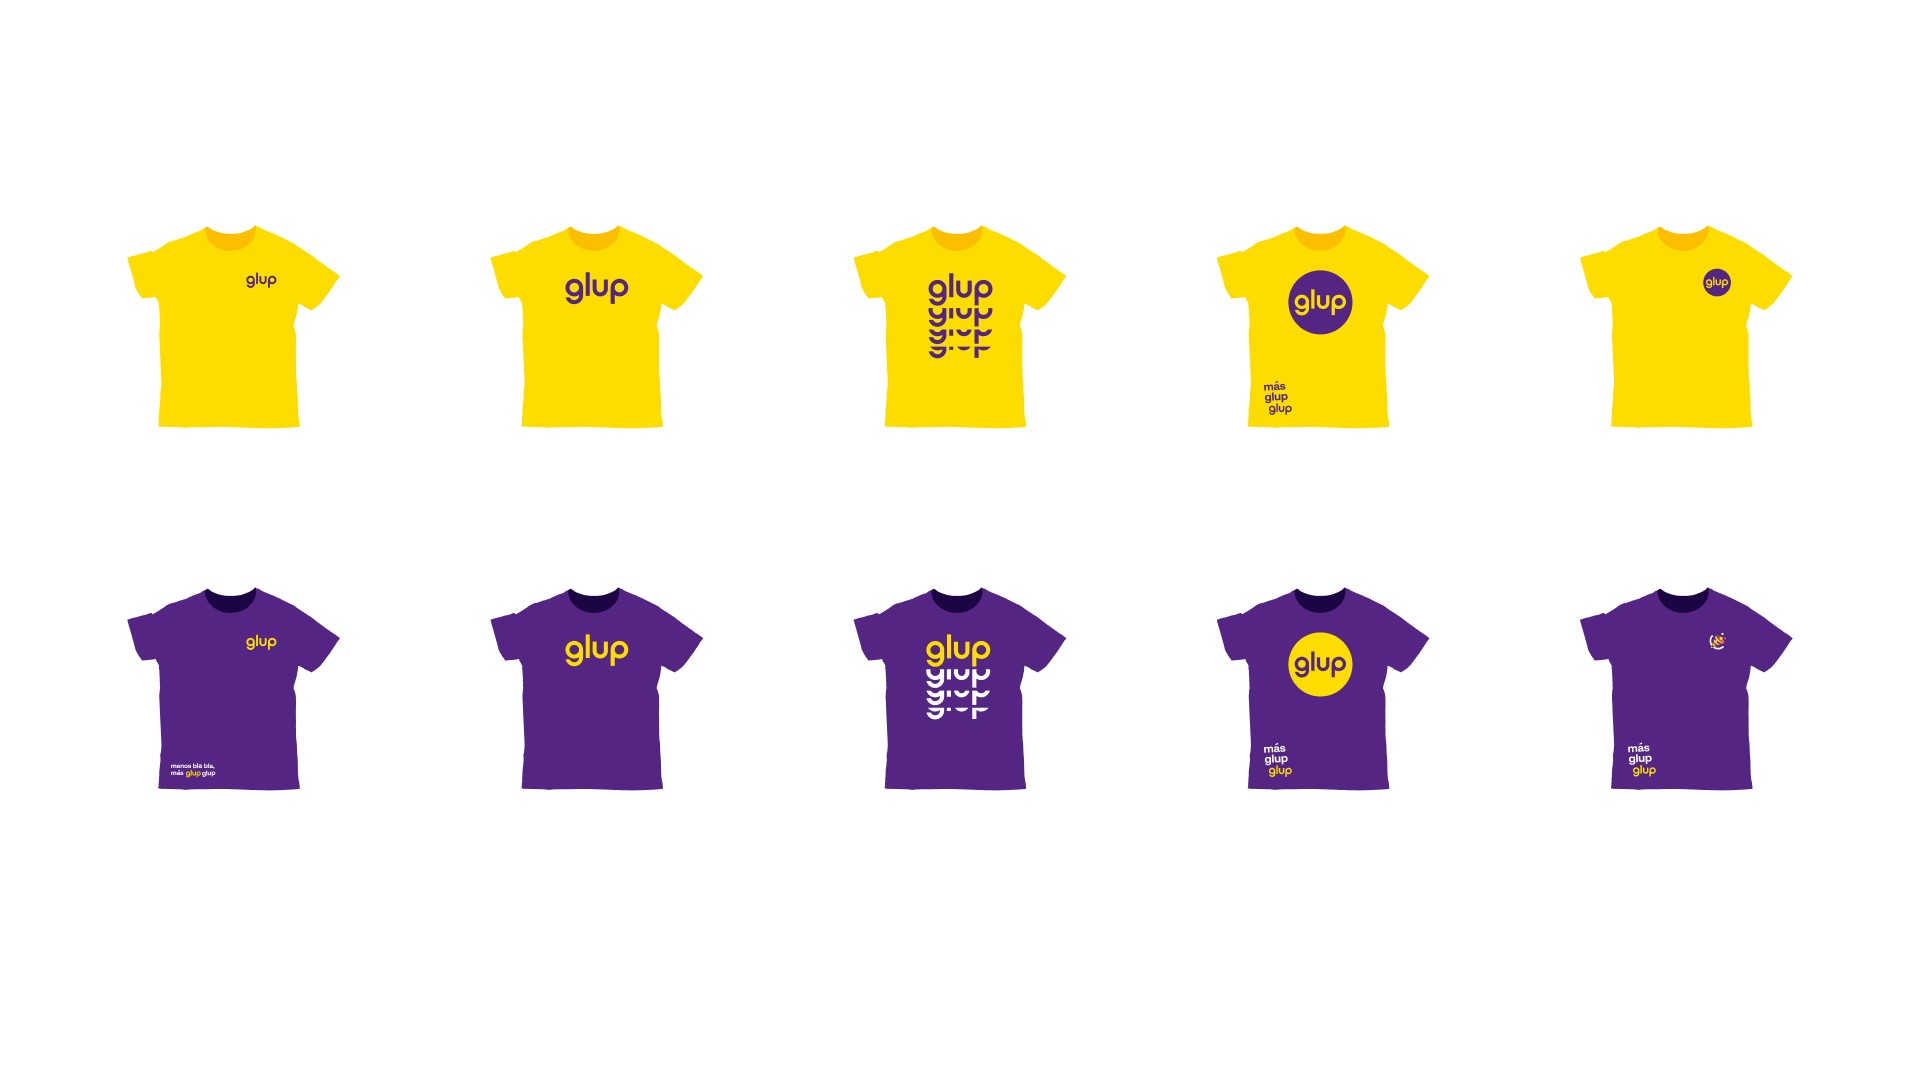 glup delivery app branding case study tshirts design